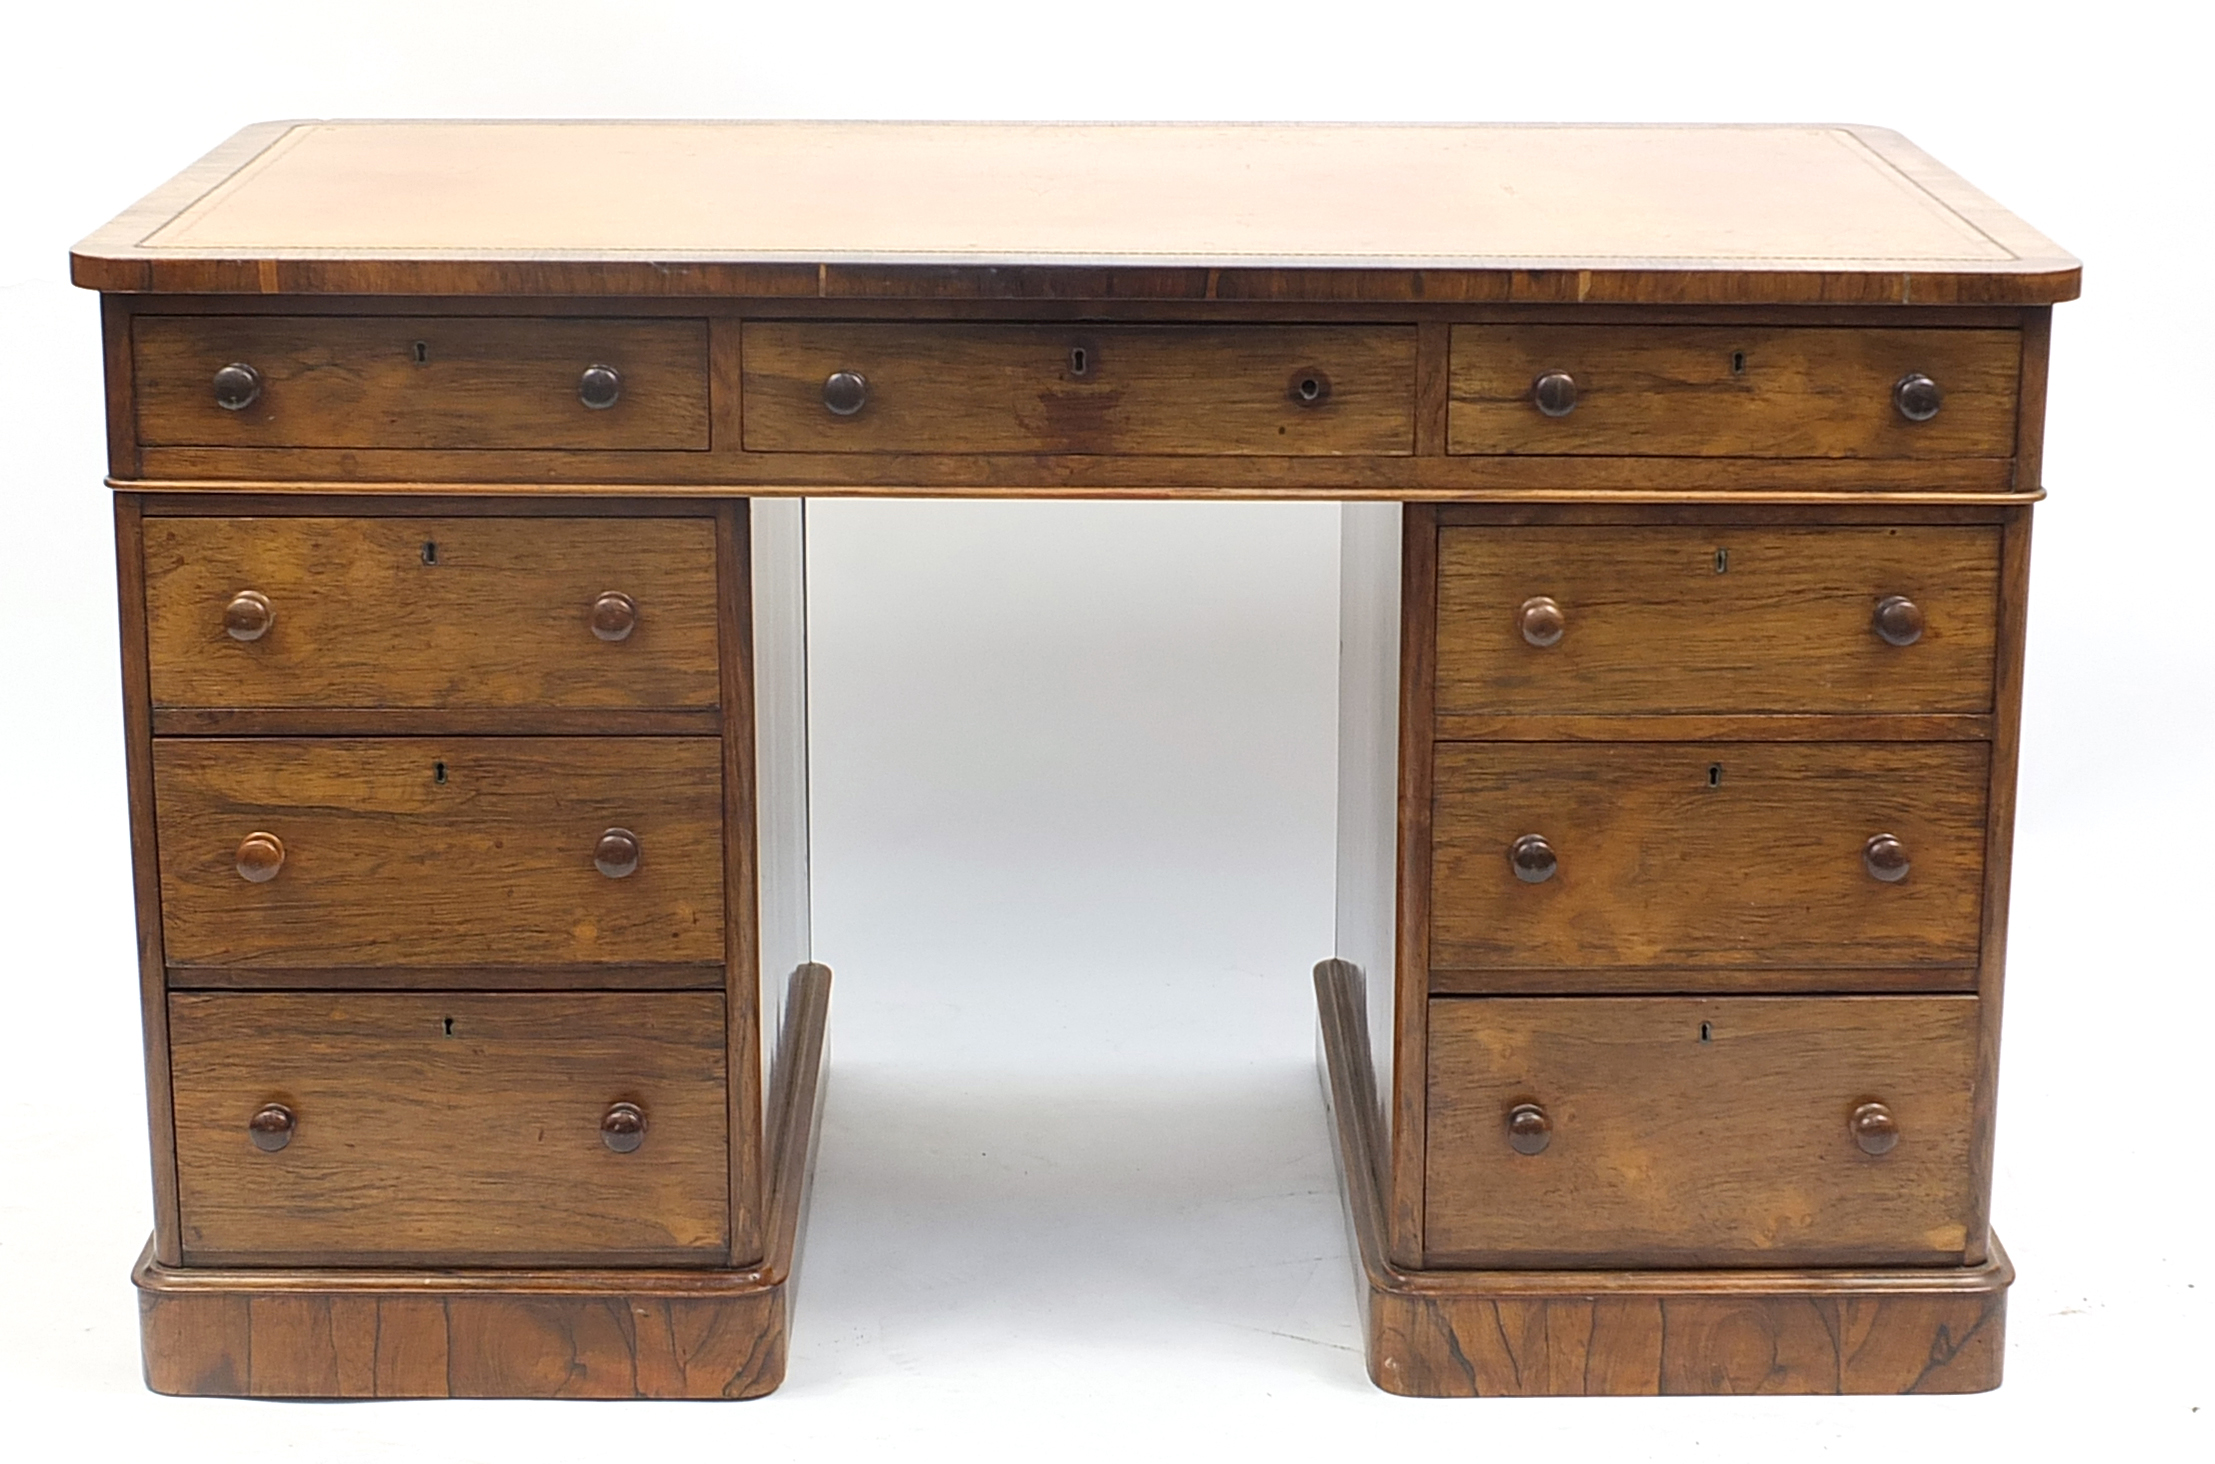 Rosewood twin pedestal desk with tooled leather insert above a series of drawers, 74cm H x 123cm W x